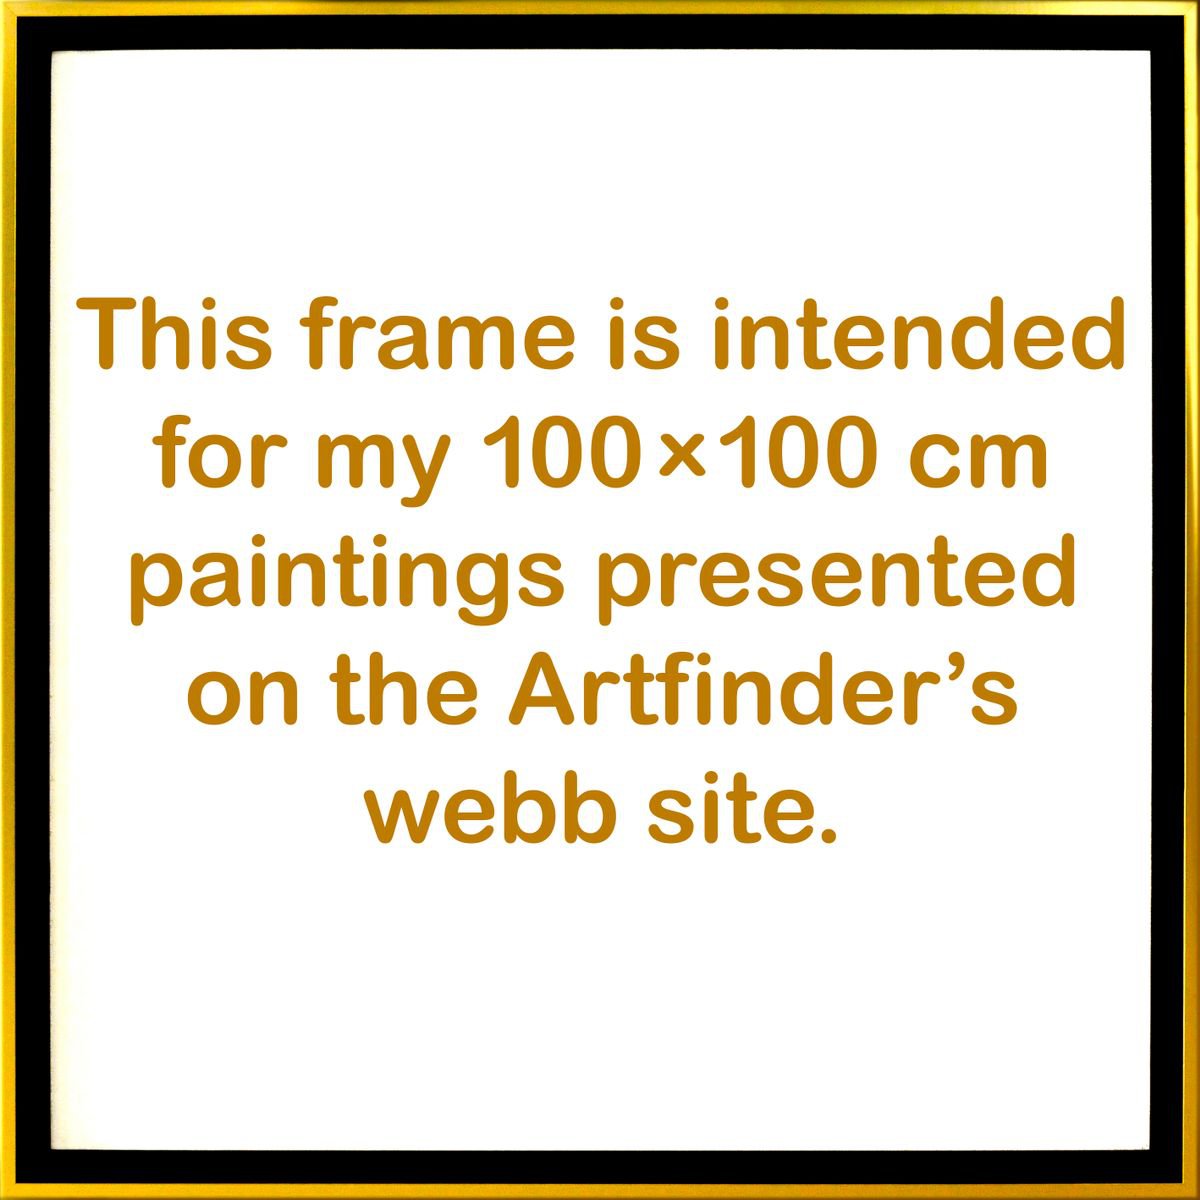 Frame 106106 cm intended for my 100100 cm paintings by Waldemar Kaliczak